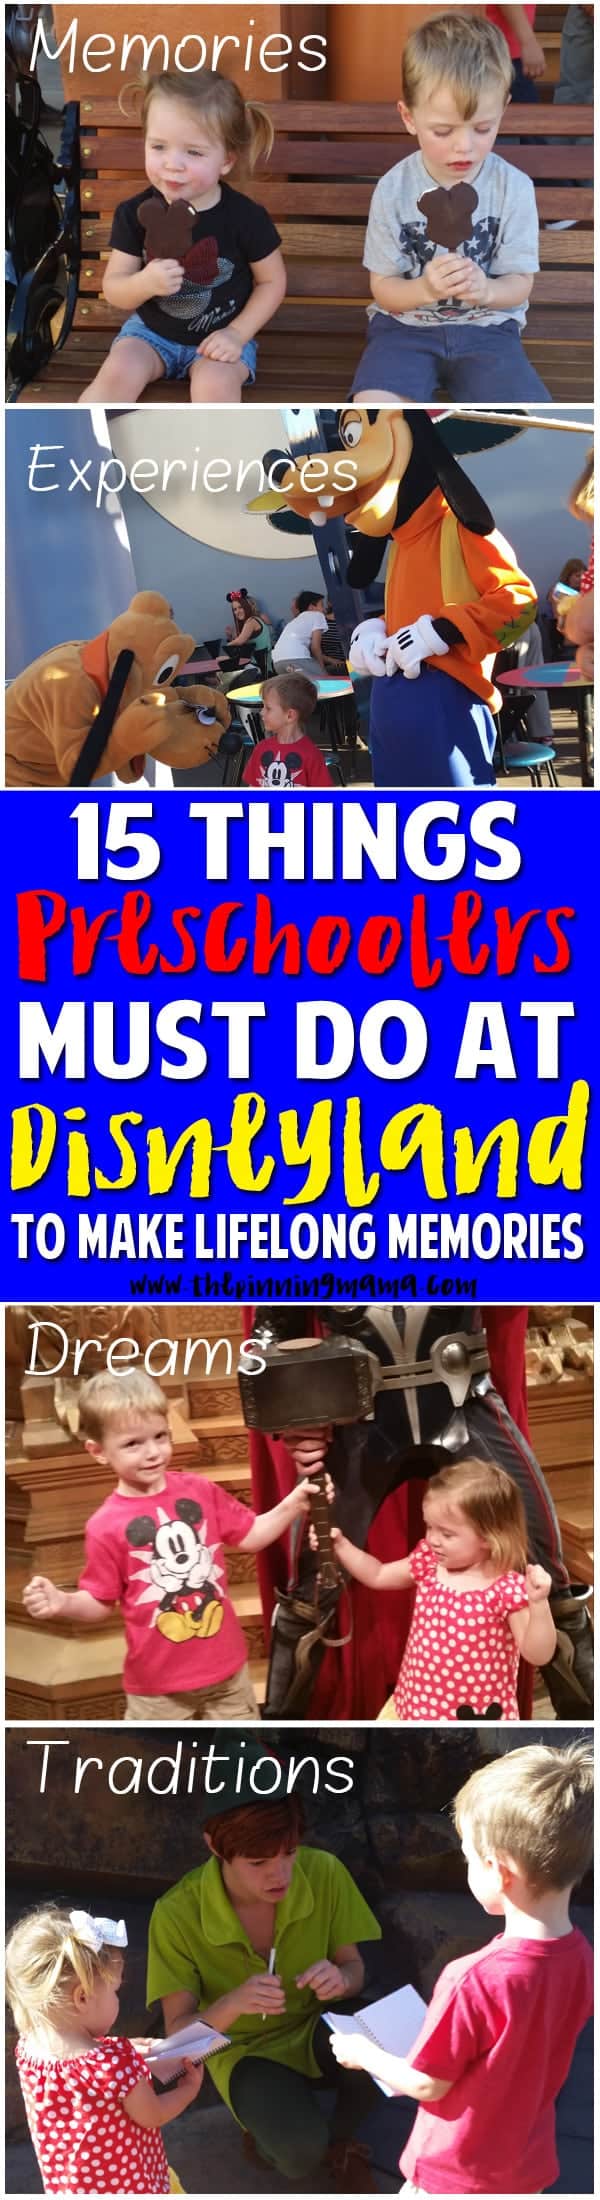 15 things you MUST DO with your kids at Disneyland! This list is full of great ideas for traditions that will make memories for a life time! Number 2 is BRILLIANT! Saving this list to do it with our preschoolers when we go to Disney!!